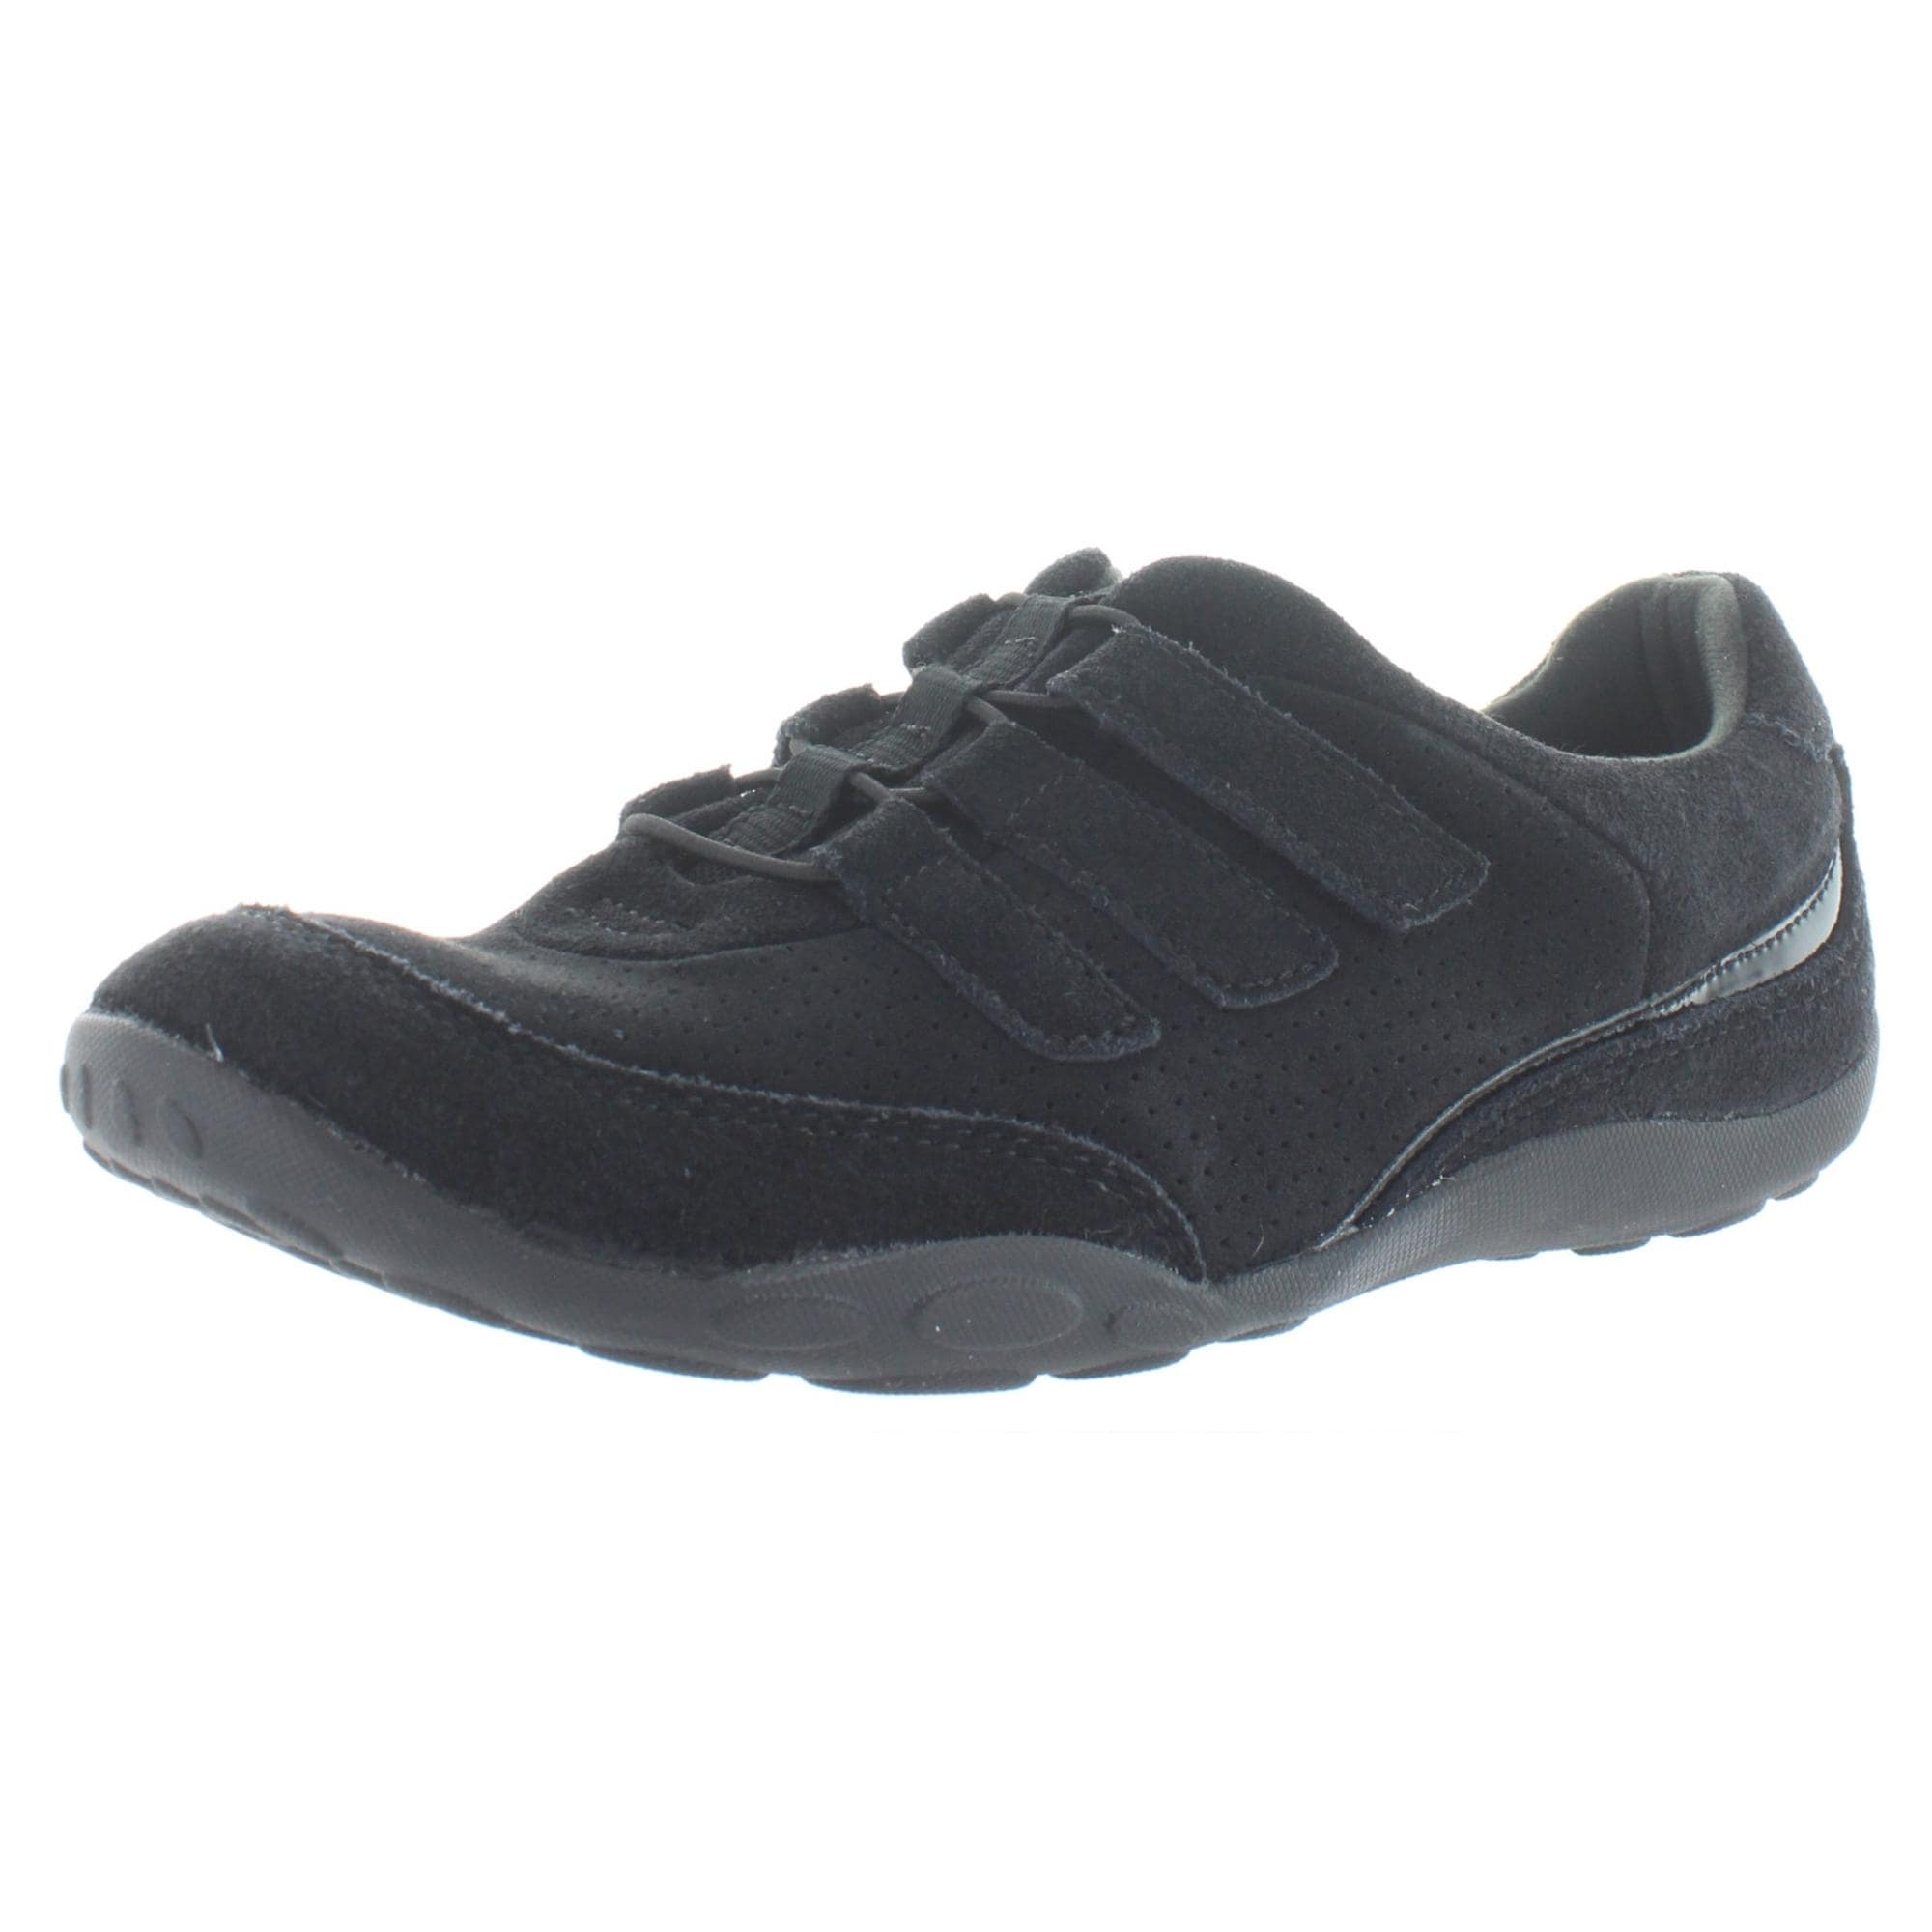 clarks womens tennis shoes